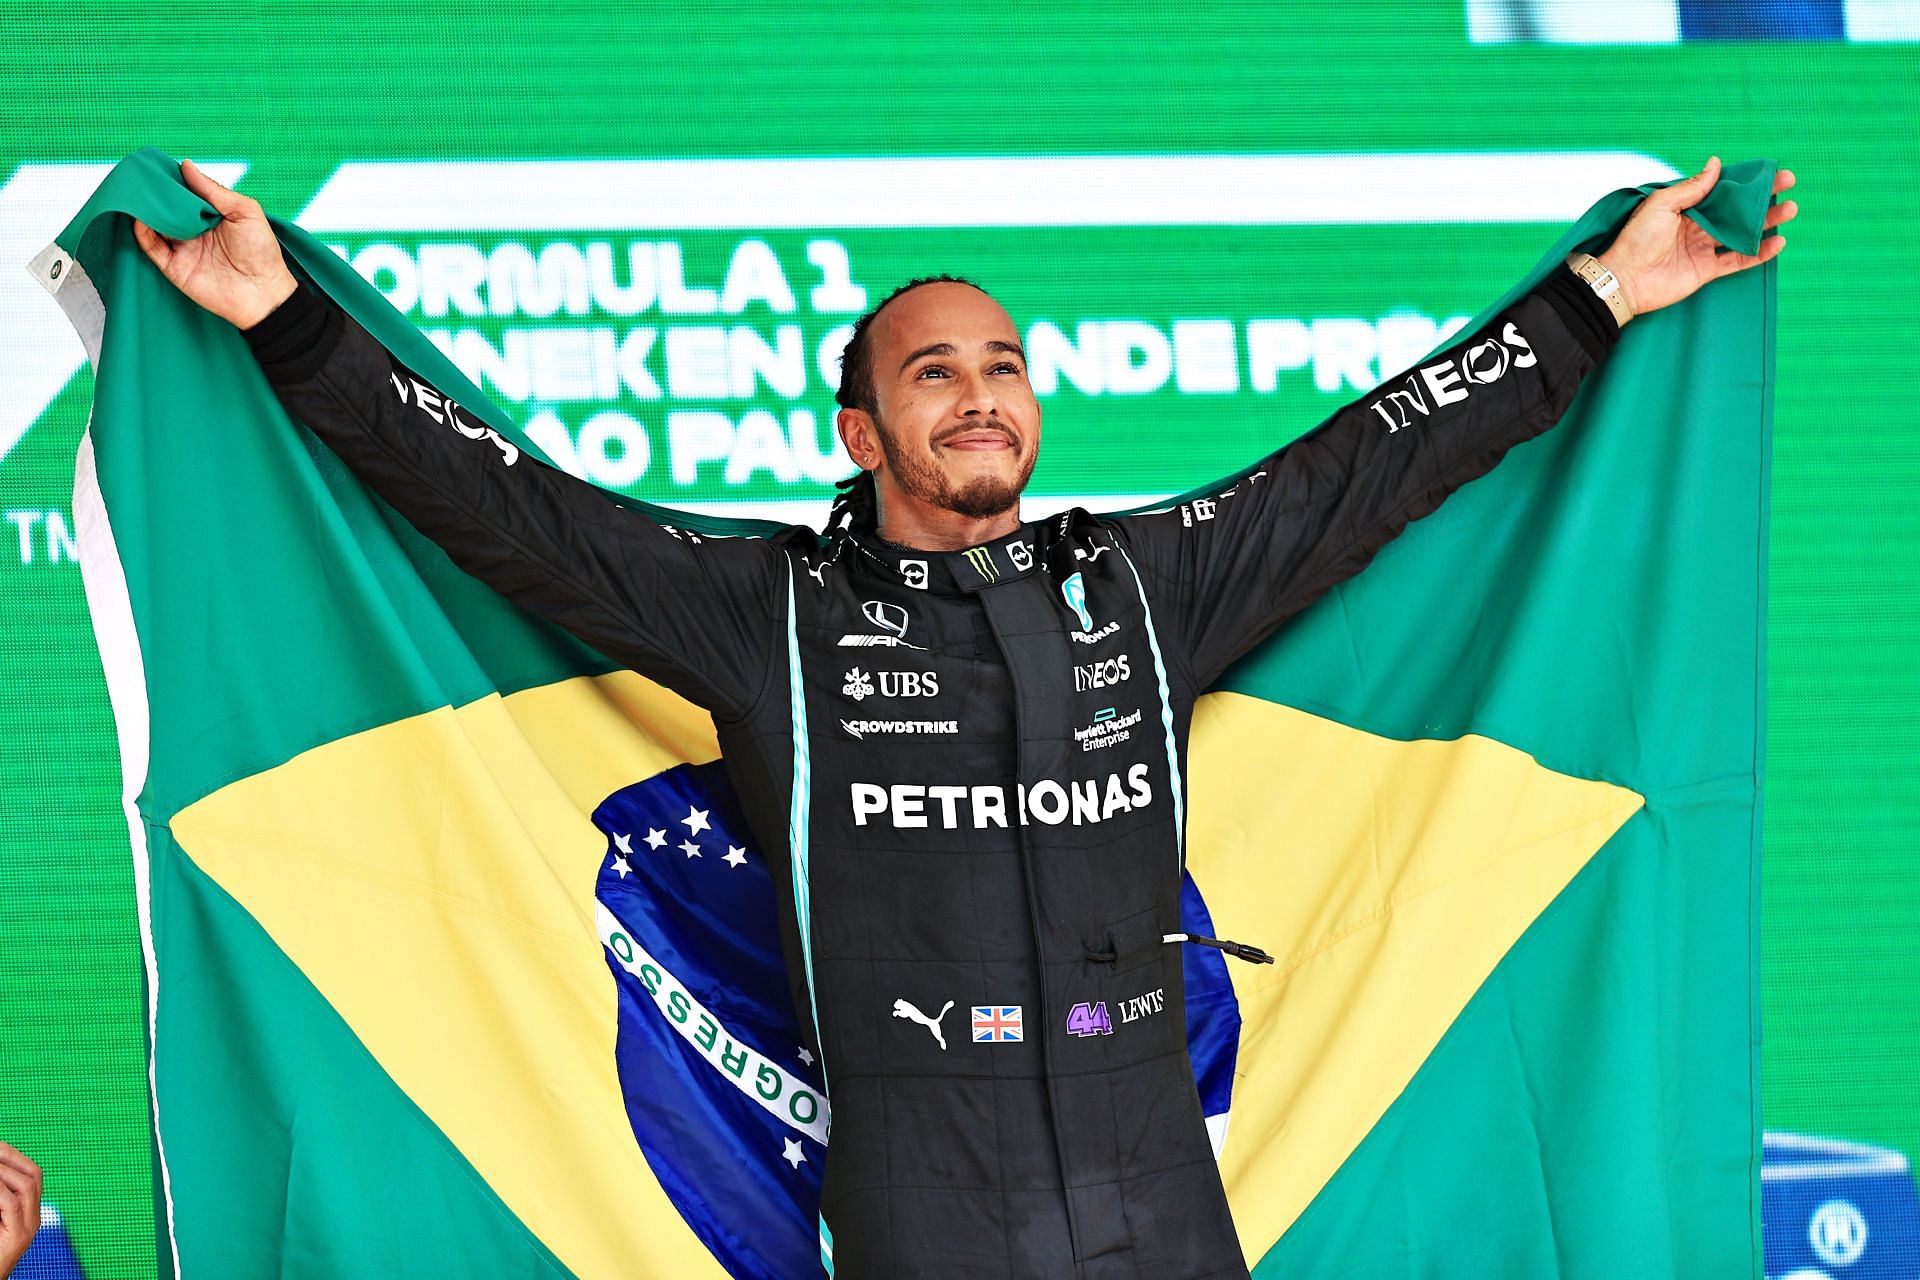 Race winner Lewis Hamilton celebrates on the podium during the F1 Grand Prix of Brazil in Sao Paulo. (Photo by Mark Thompson/Getty Images)